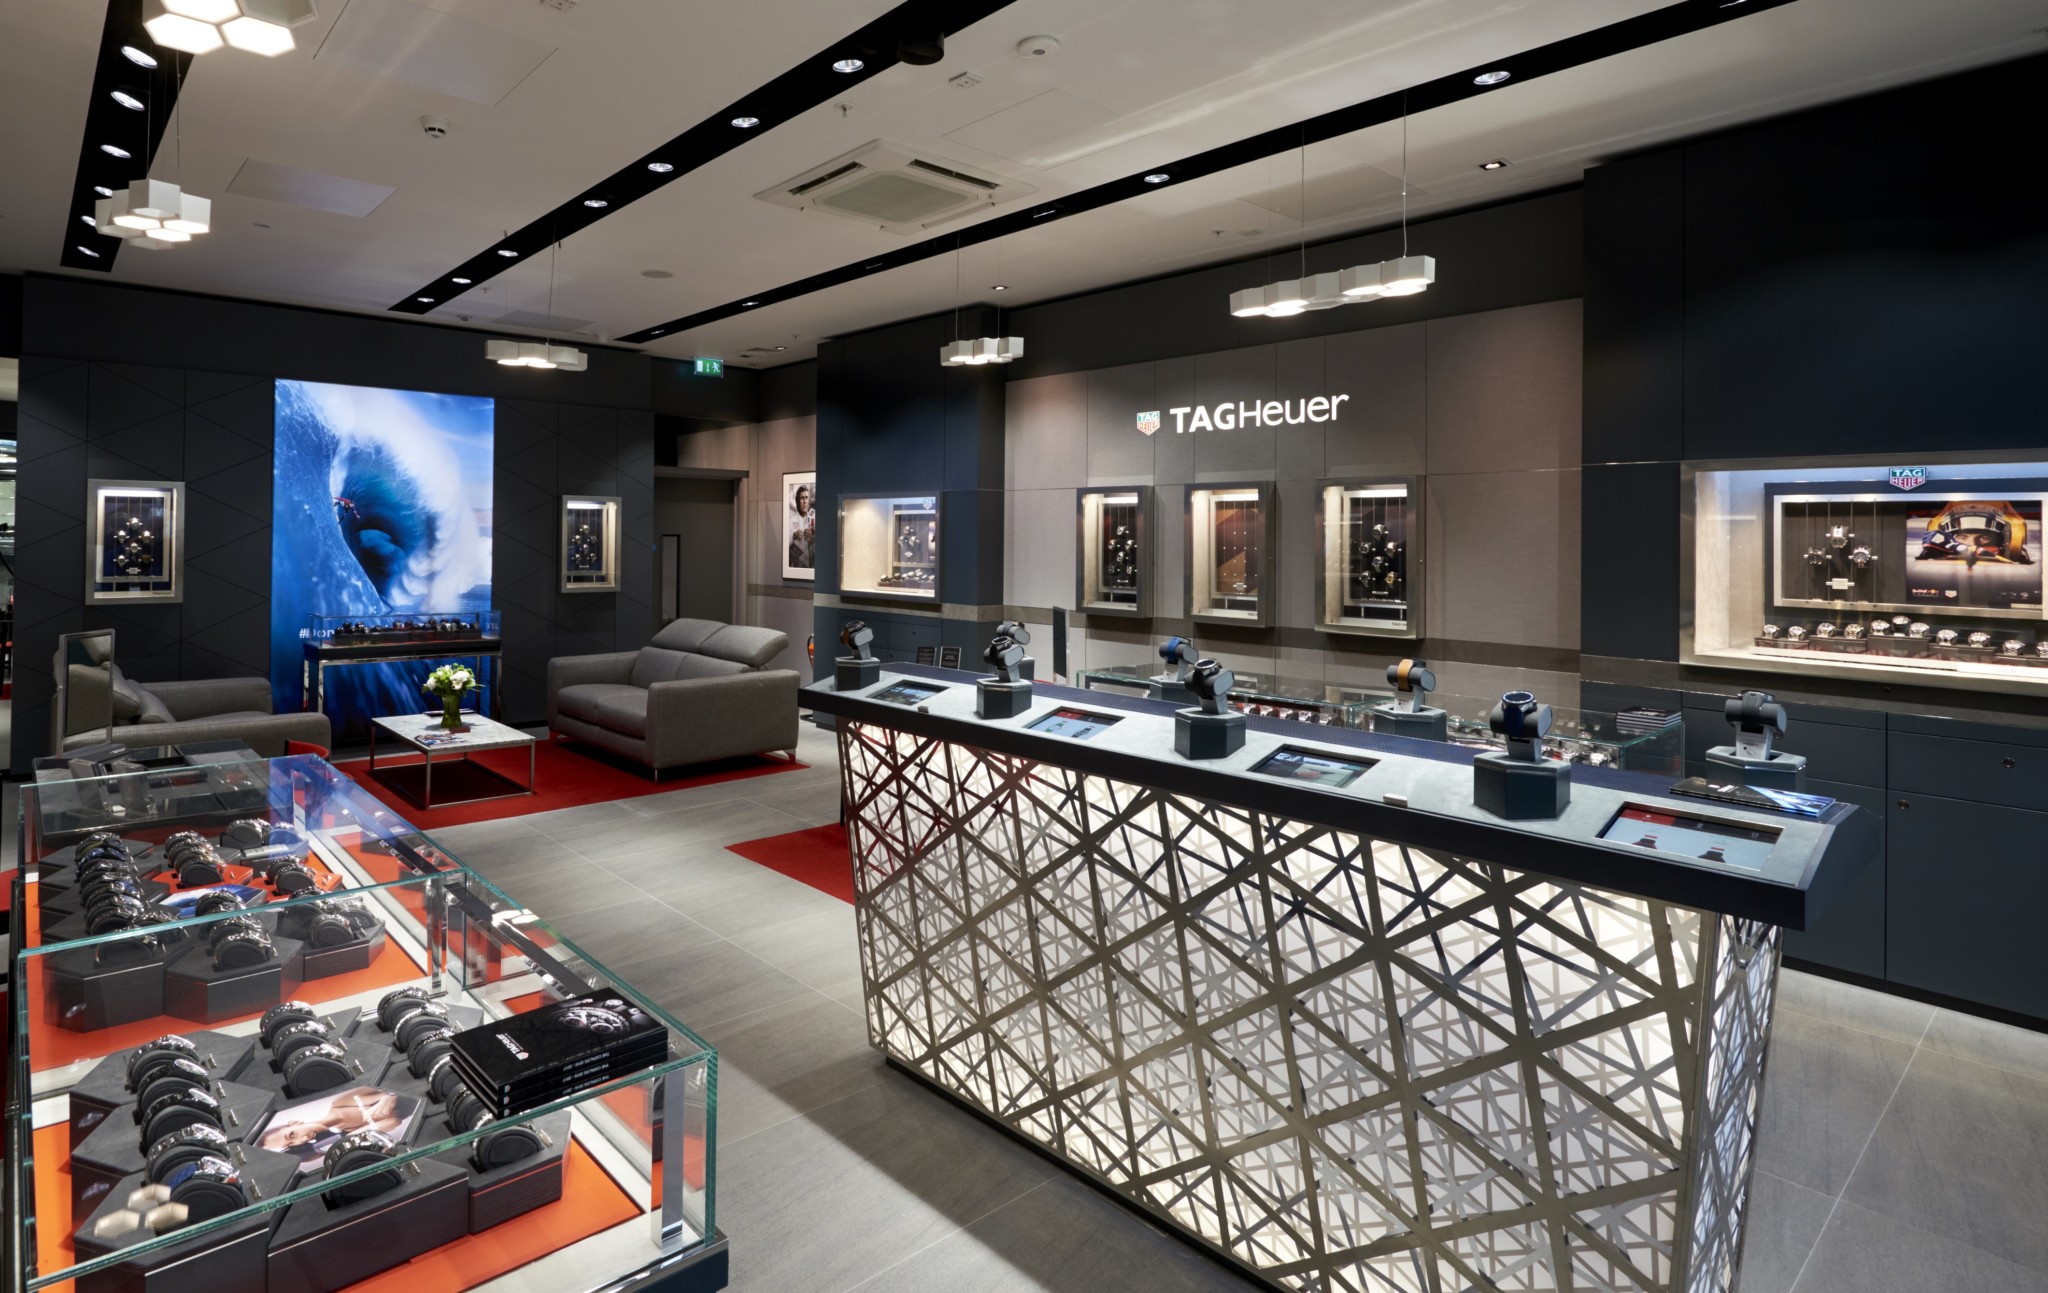 The brand new tag heuer boutique in meadowhall